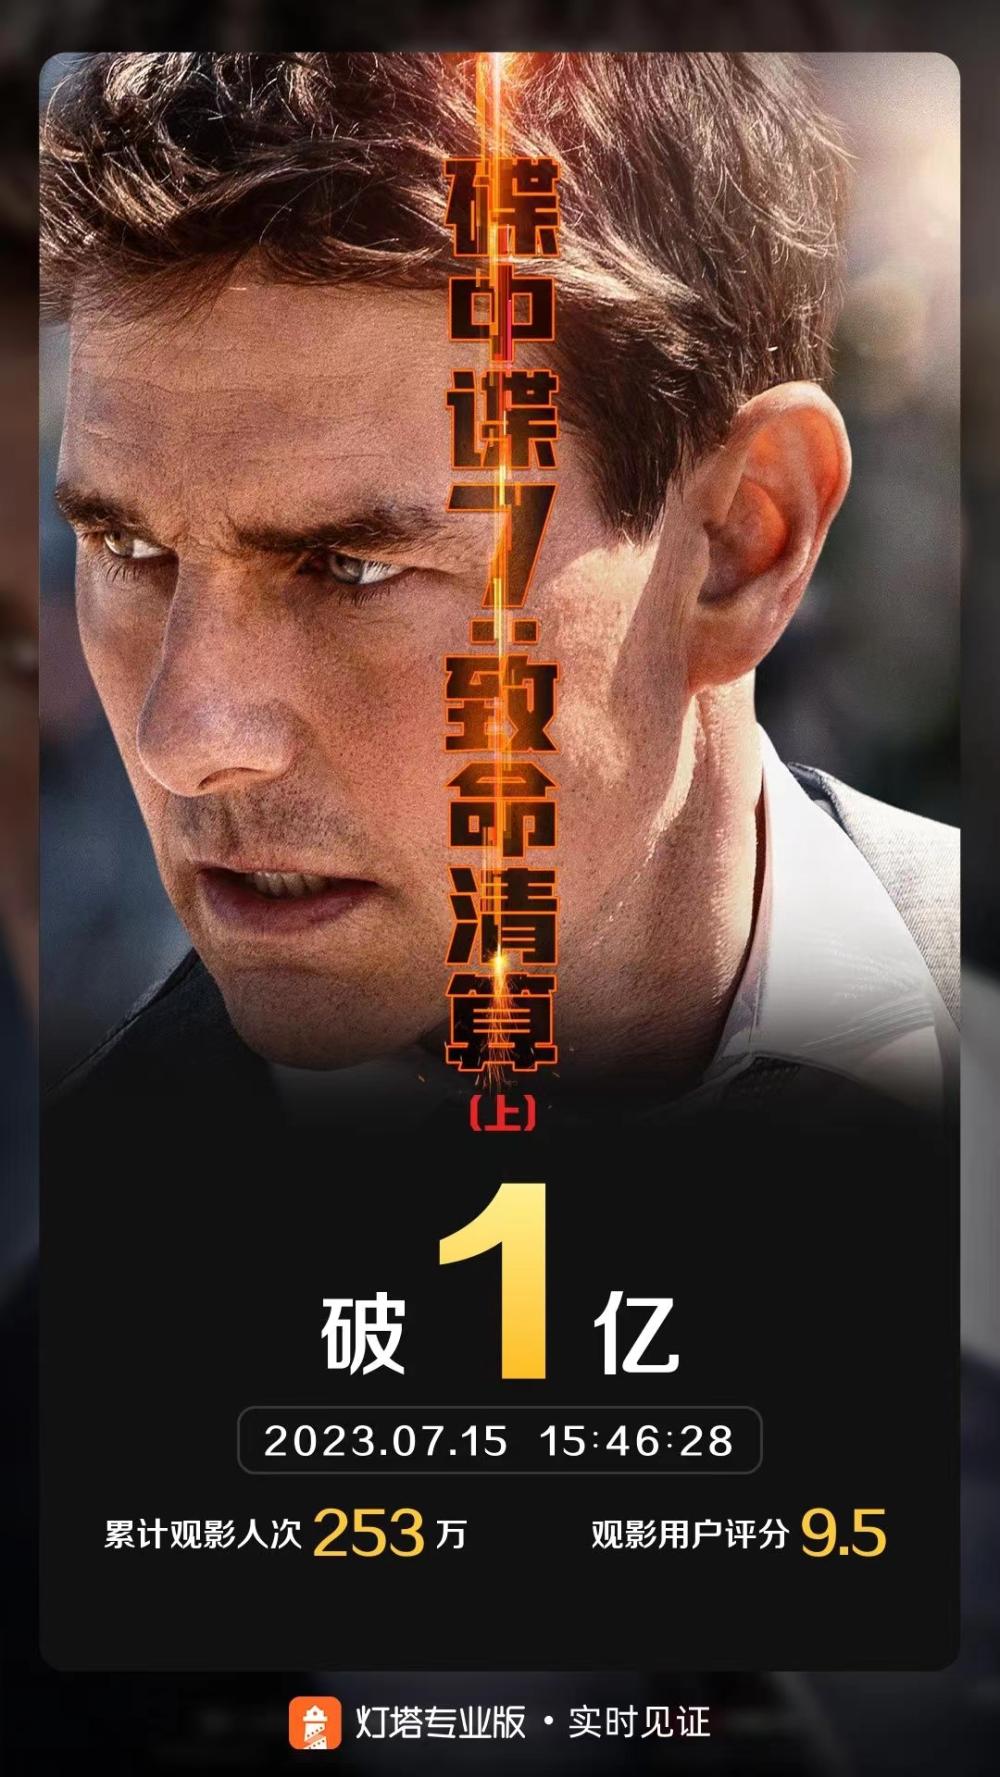 Do you accept it?, Mission Impossible 7: Deadly Reckoning (Part 1) Released: Super long blockbuster yet to be completed, sequel series | Mission Impossible 7 | Unfinished, sequel